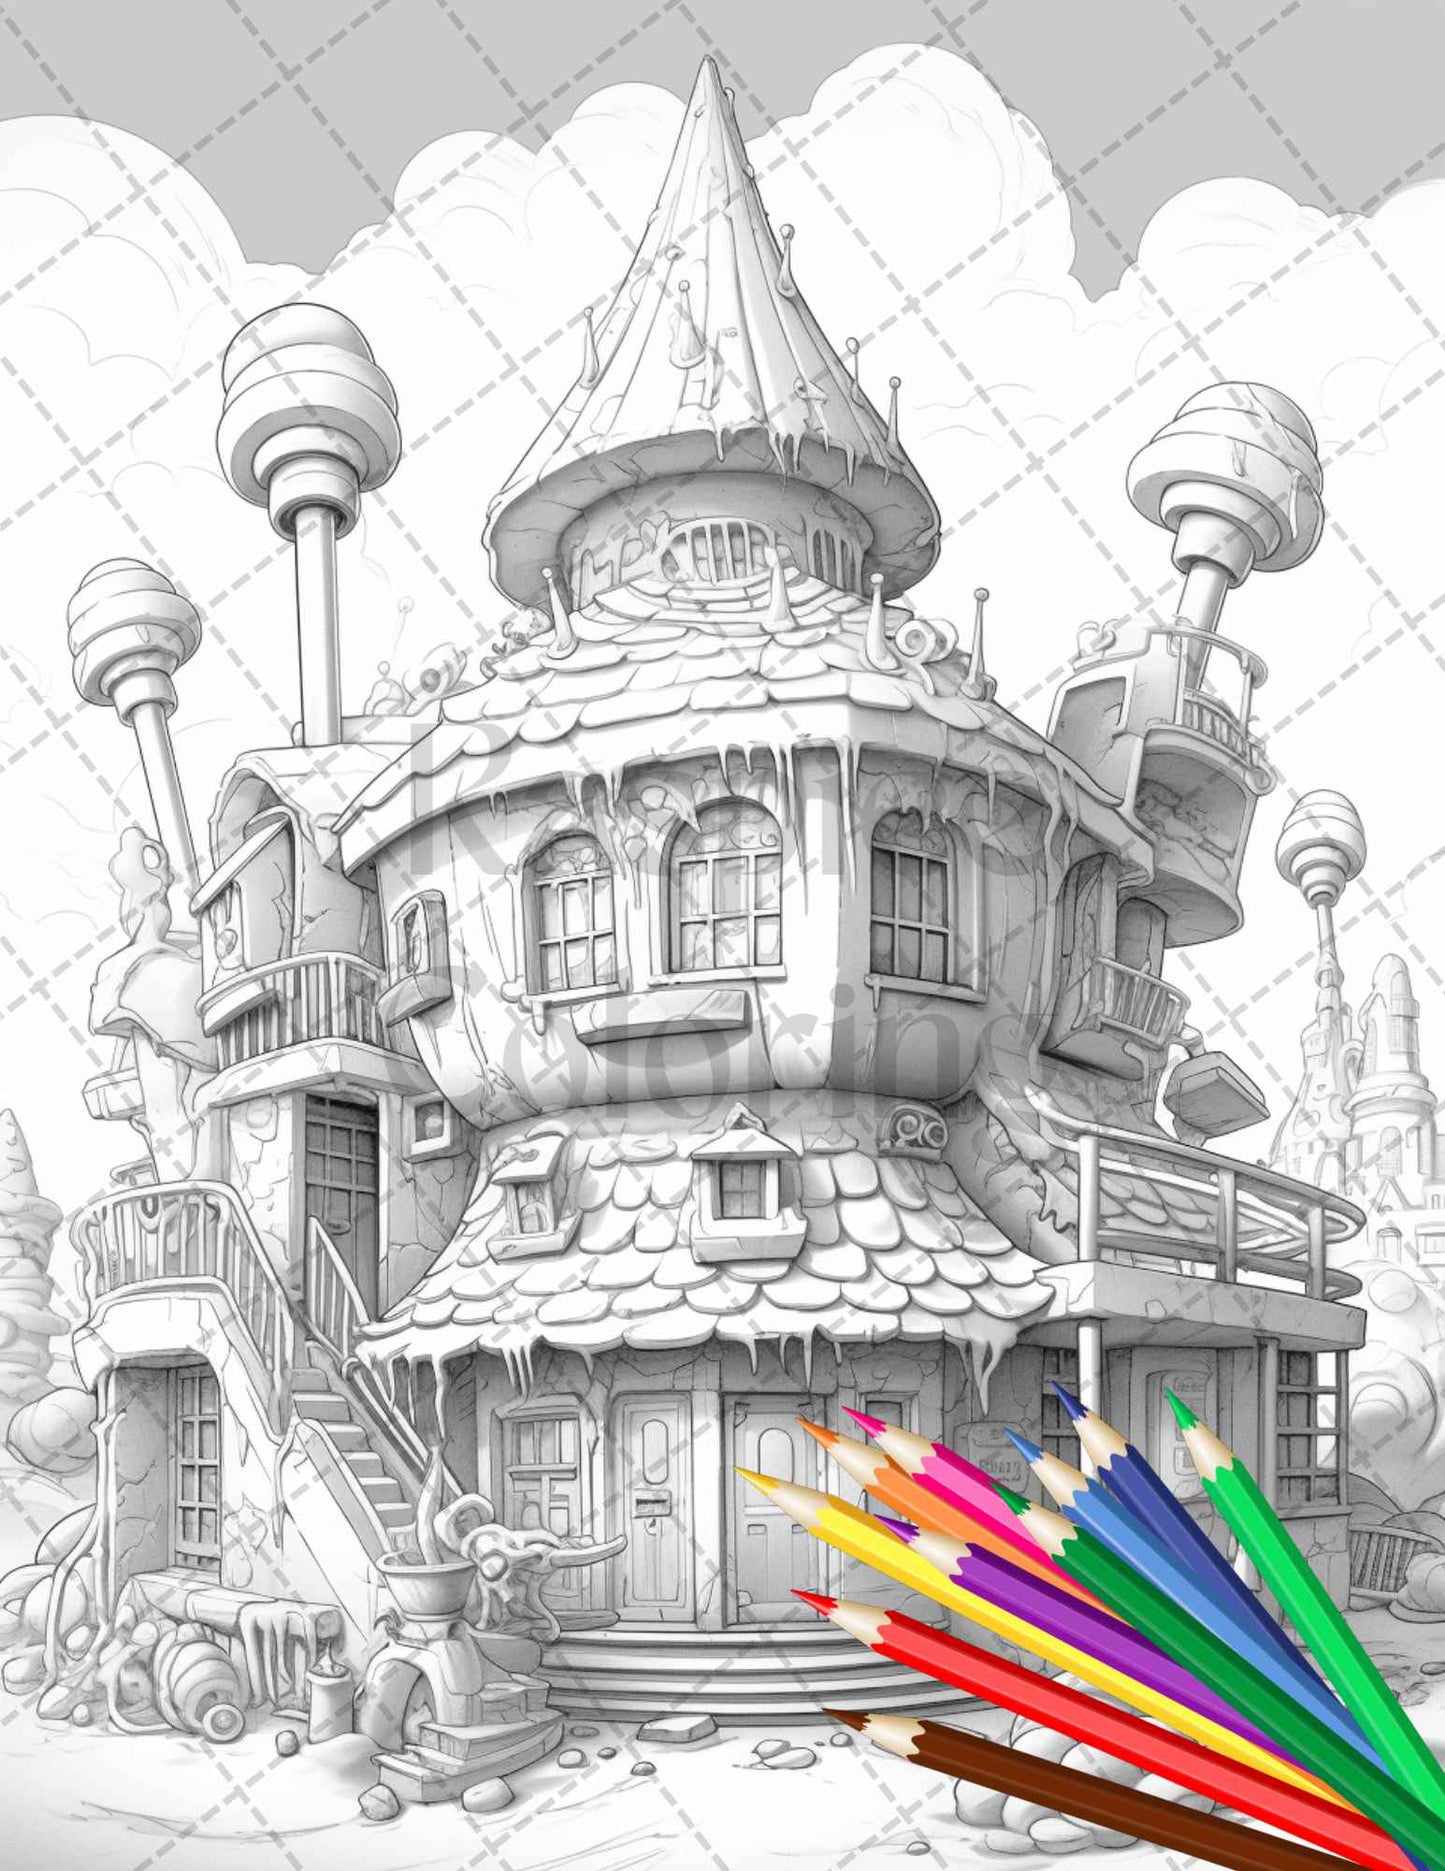 33 Ice Cream Houses Grayscale Coloring Pages Printable for Adults and Kids, PDF File Instant Download - raspiee